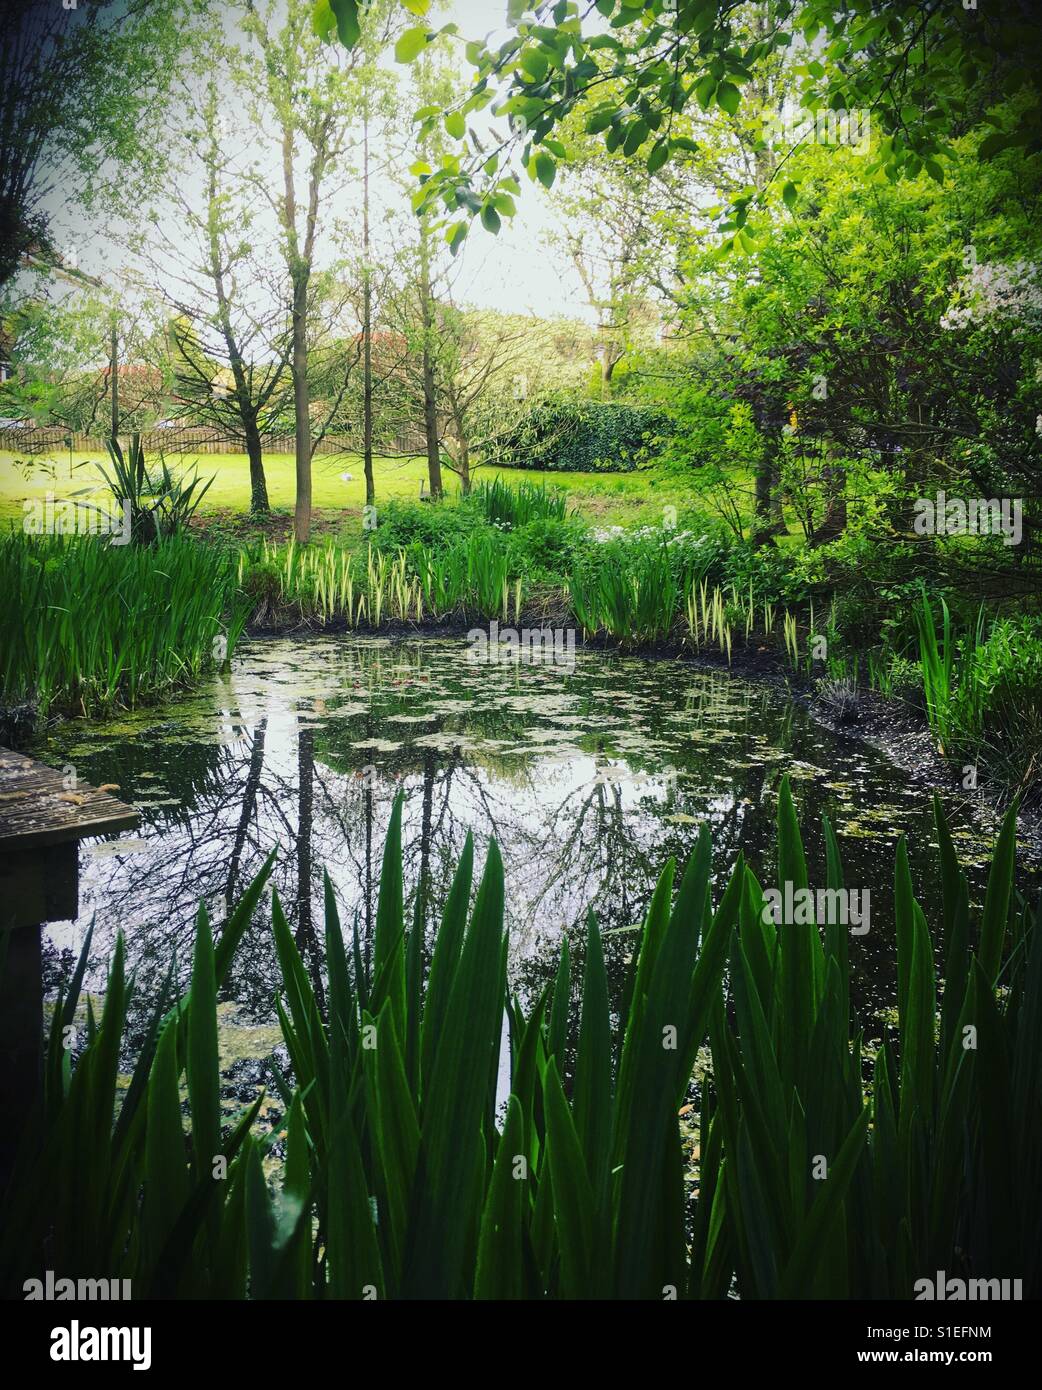 Summer pond showing enviroment growth Stock Photo